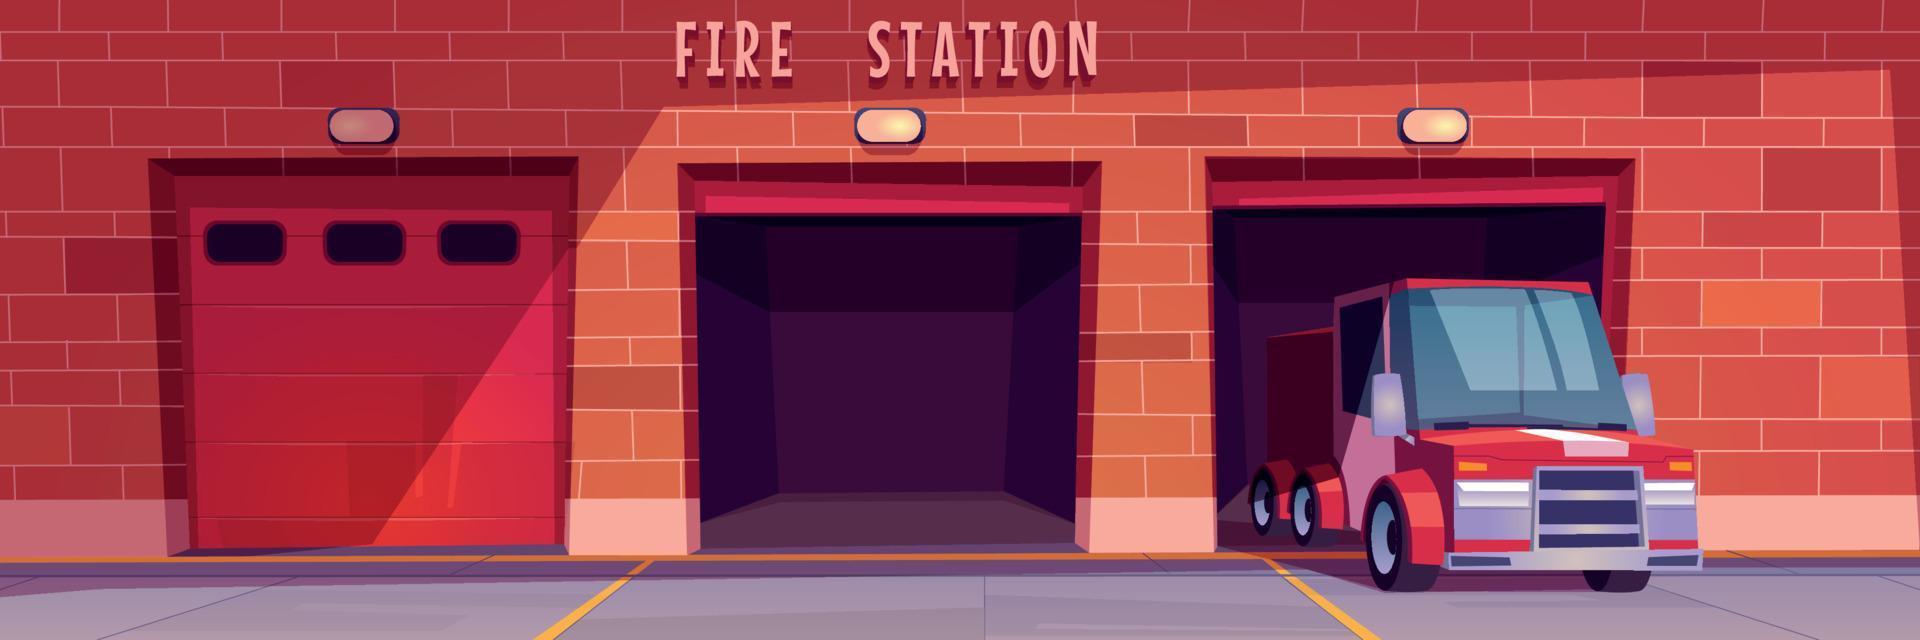 Fire station garage with red truck leaving box vector